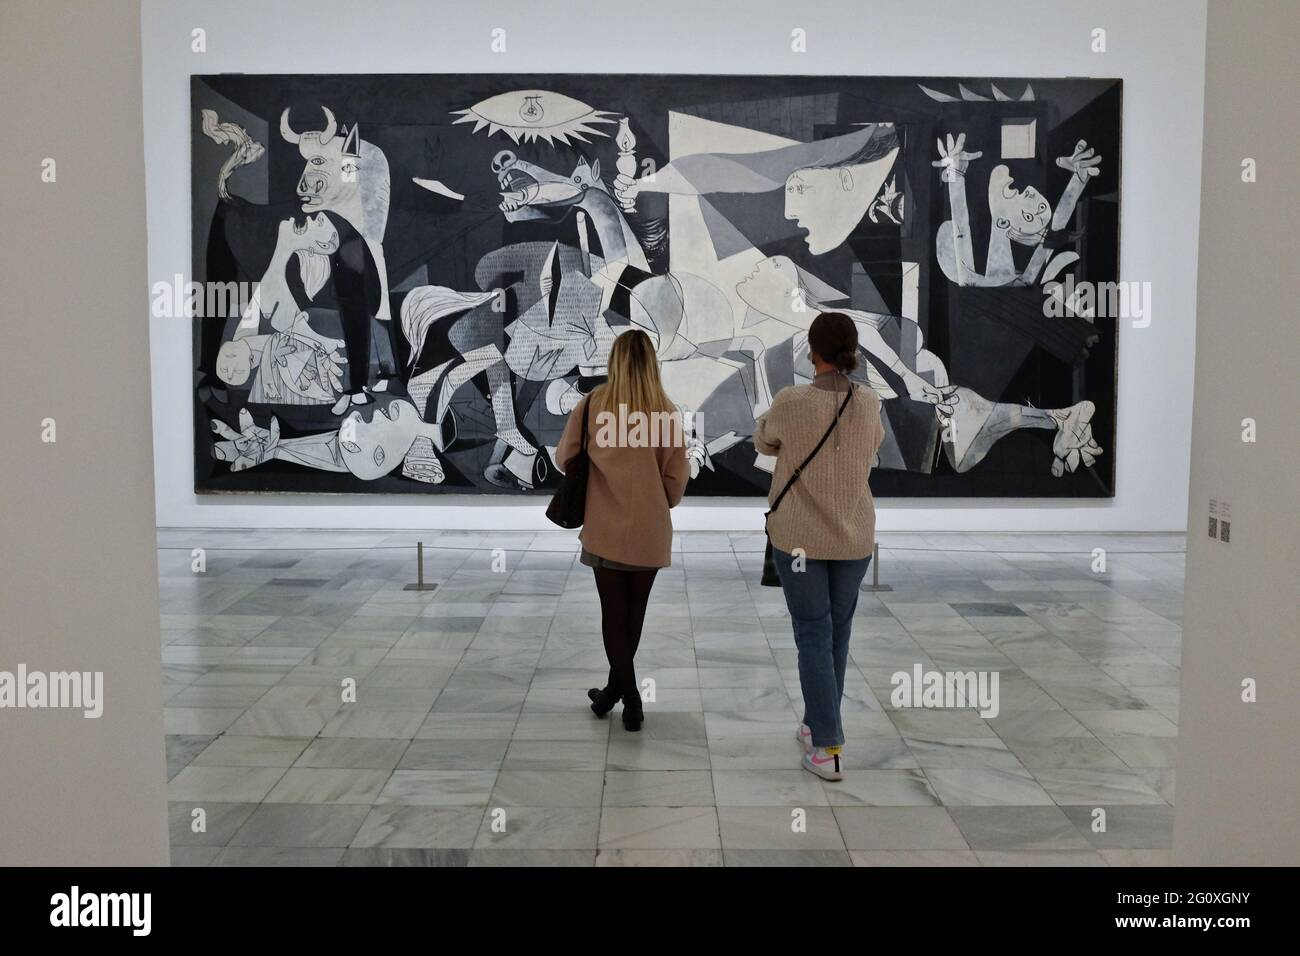 Tourists watching the famous Guernica, by Pablo Picasso, at the Reina Sofia museum, in Madrid, Spain. Stock Photo